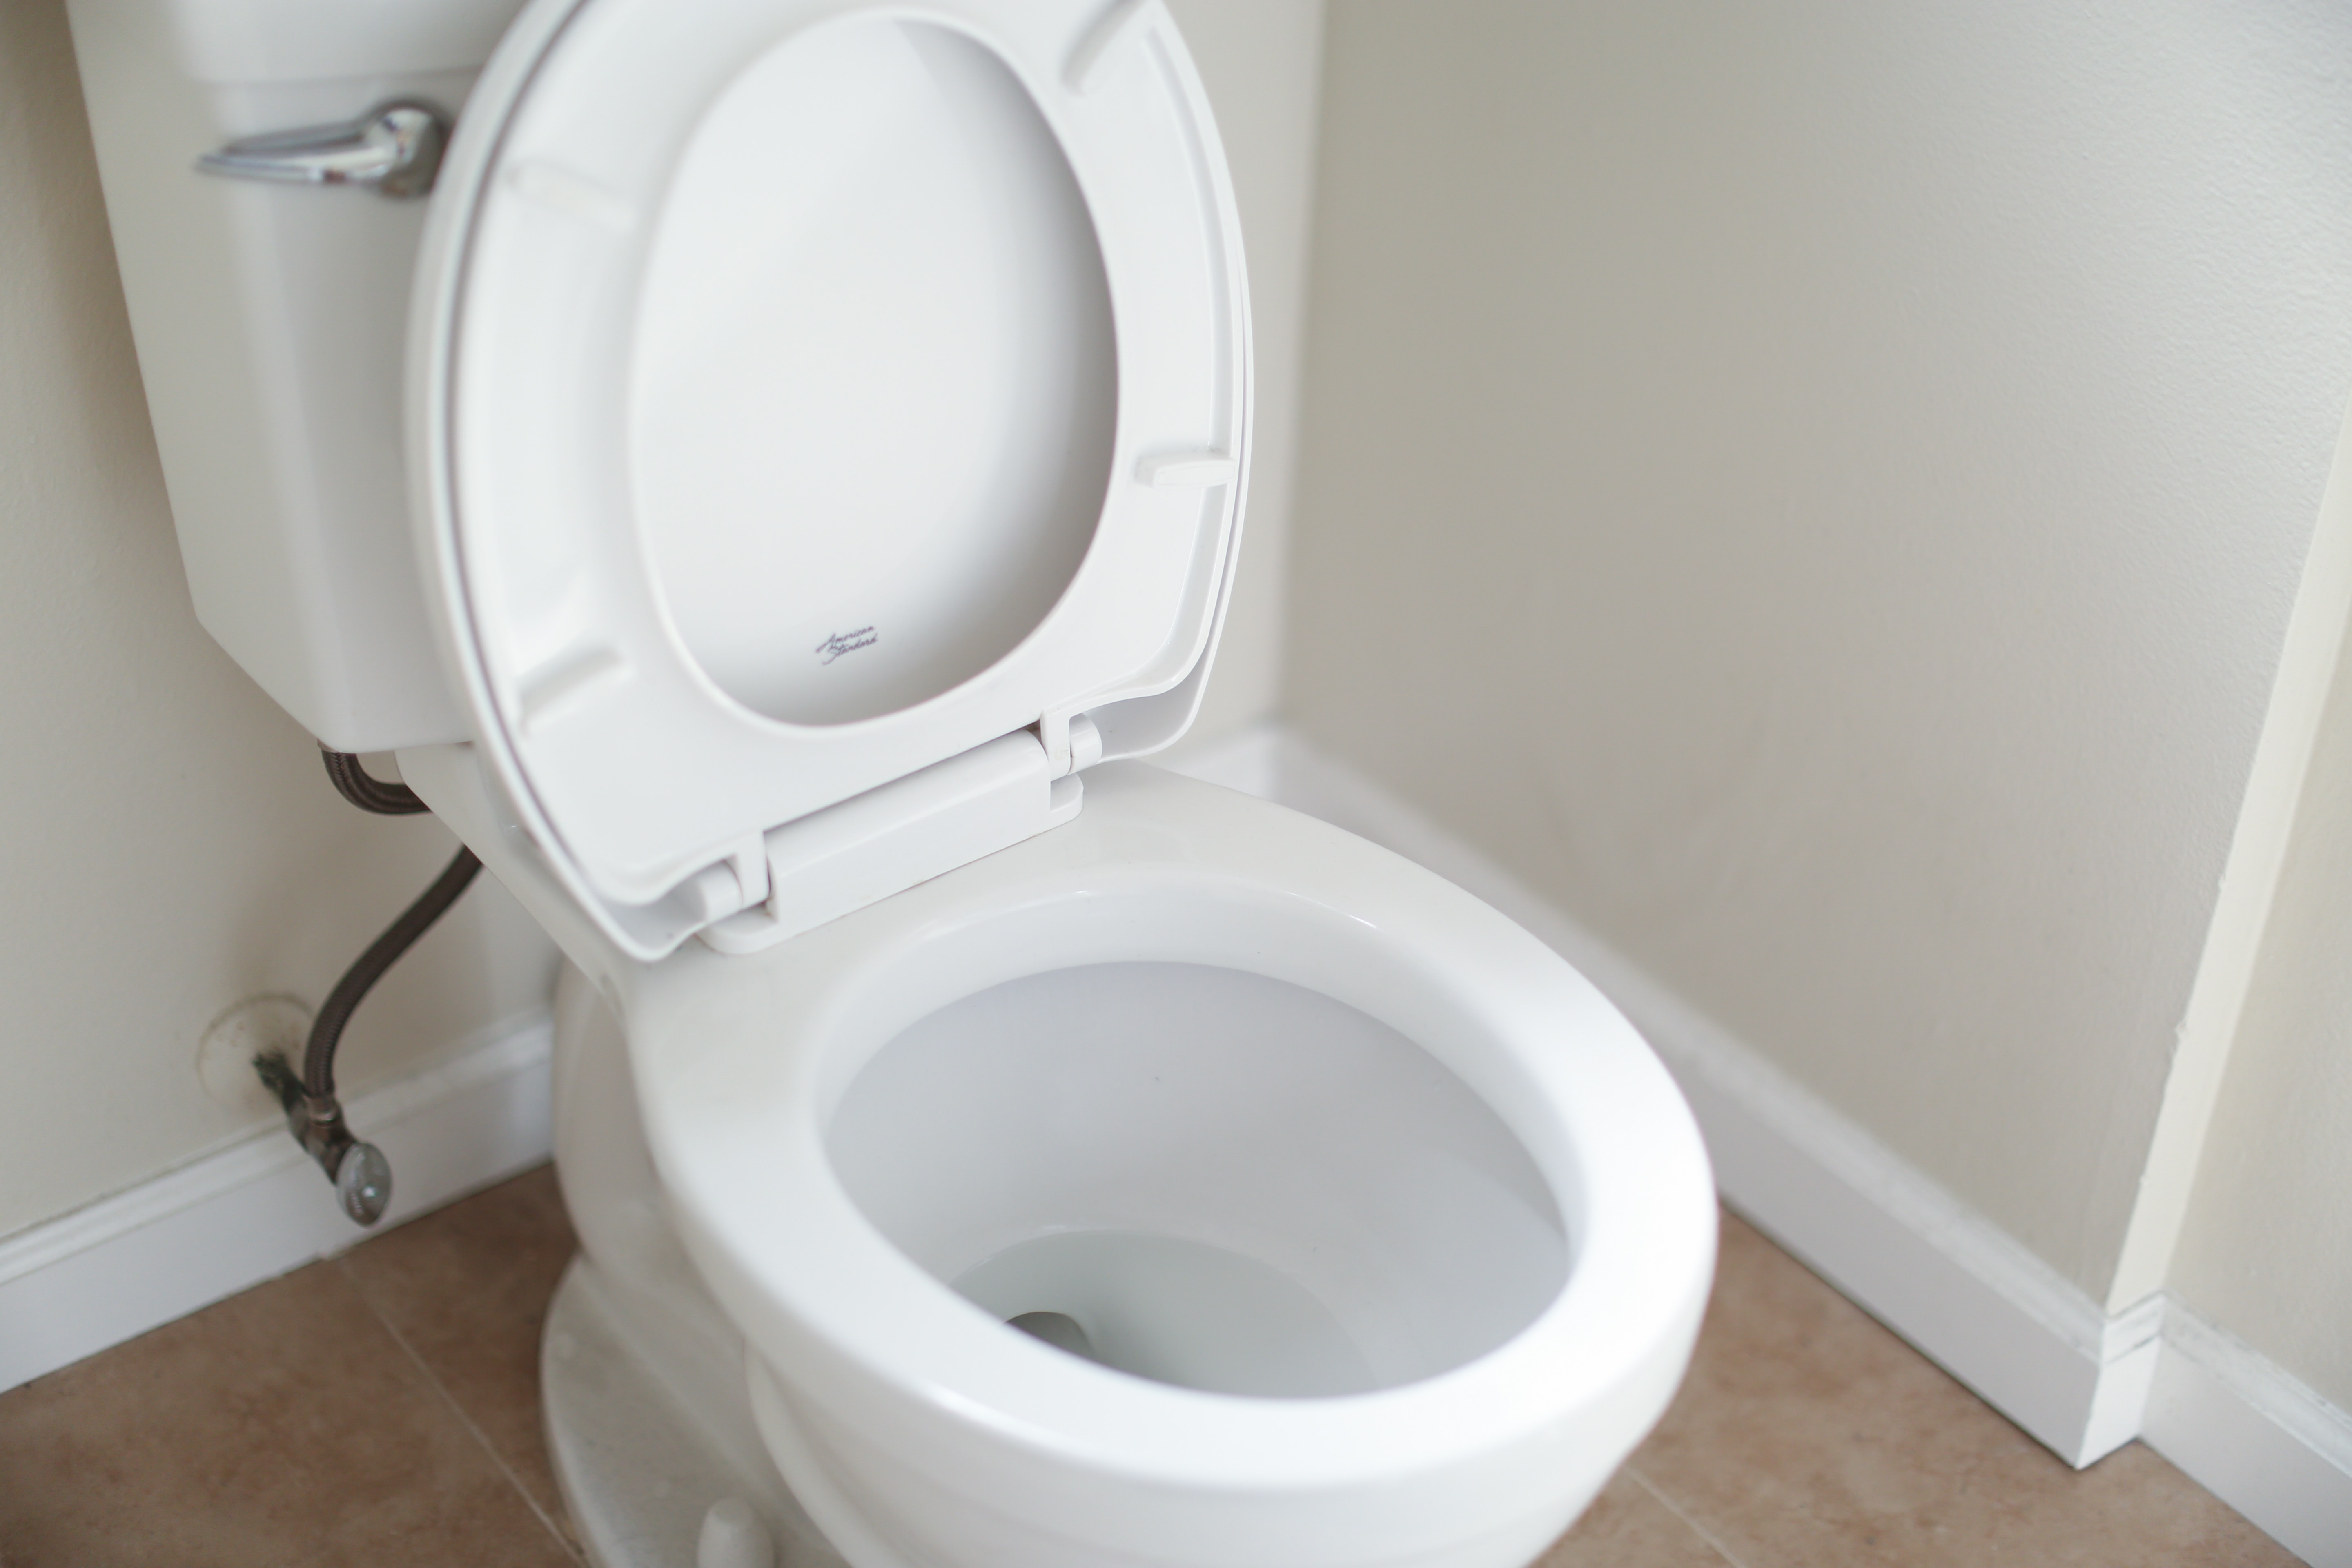 Are Your Pipes Knocking When You Flush The Toilet?